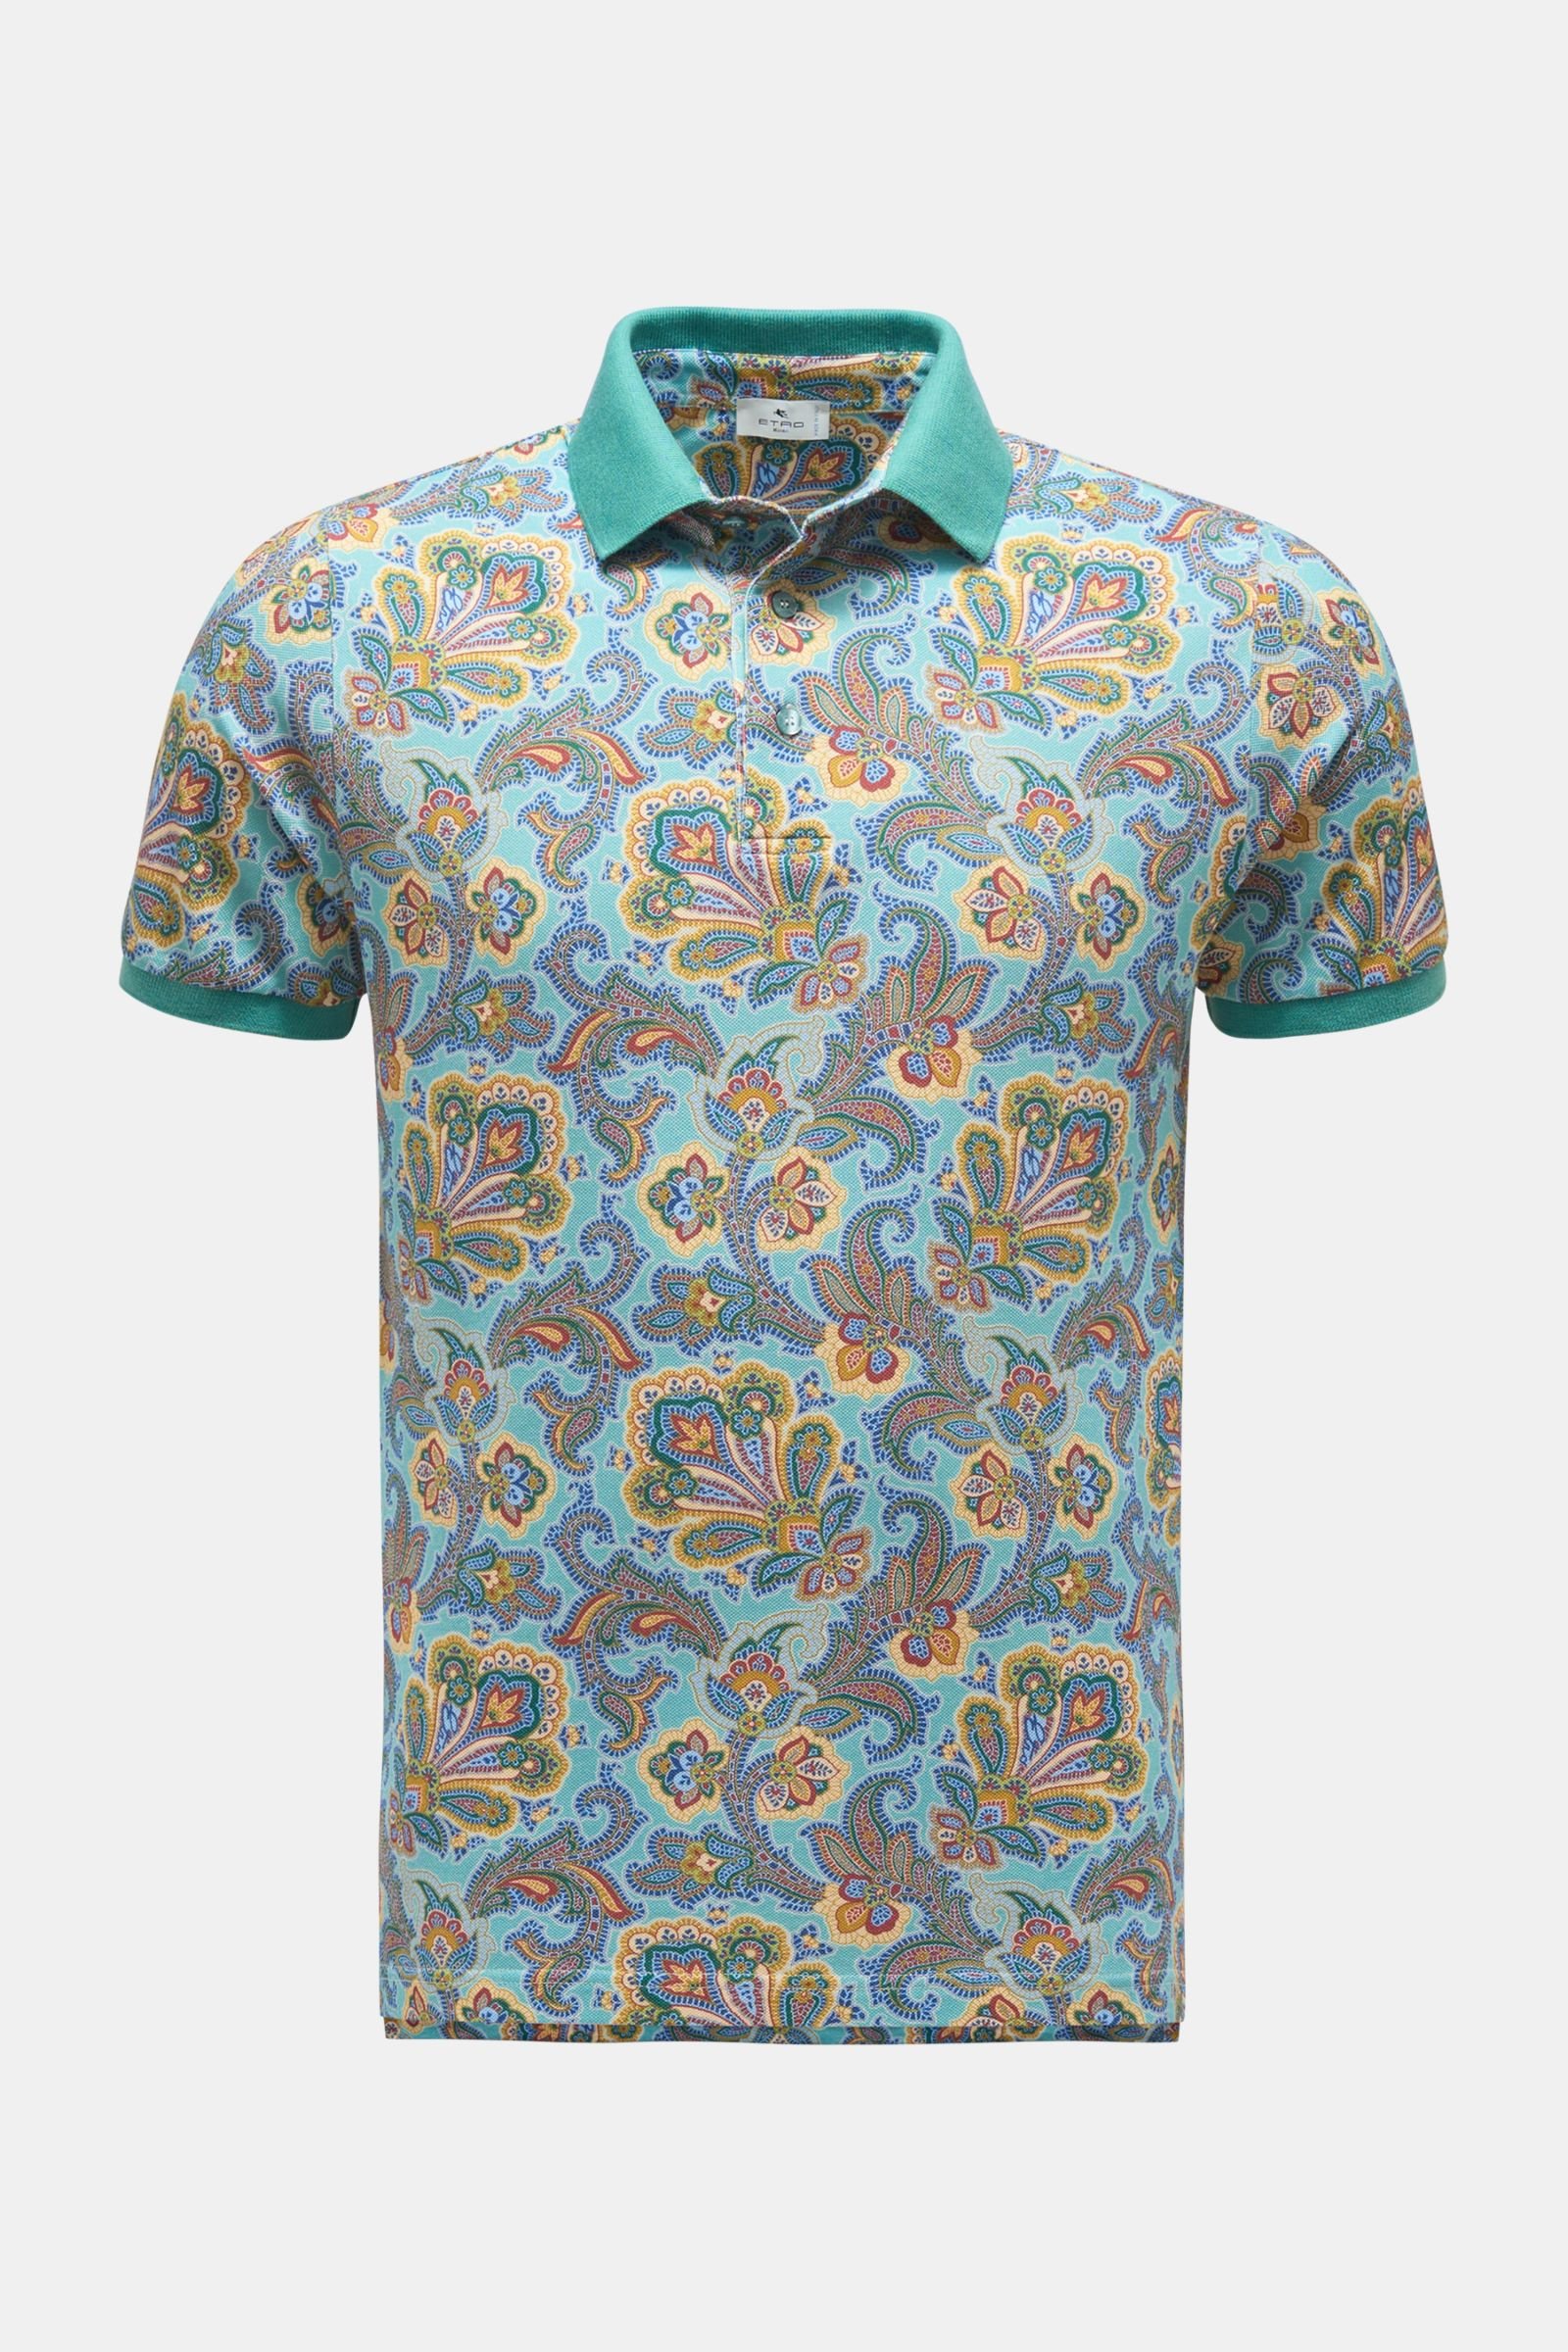 Polo shirt turquoise/yellow patterned